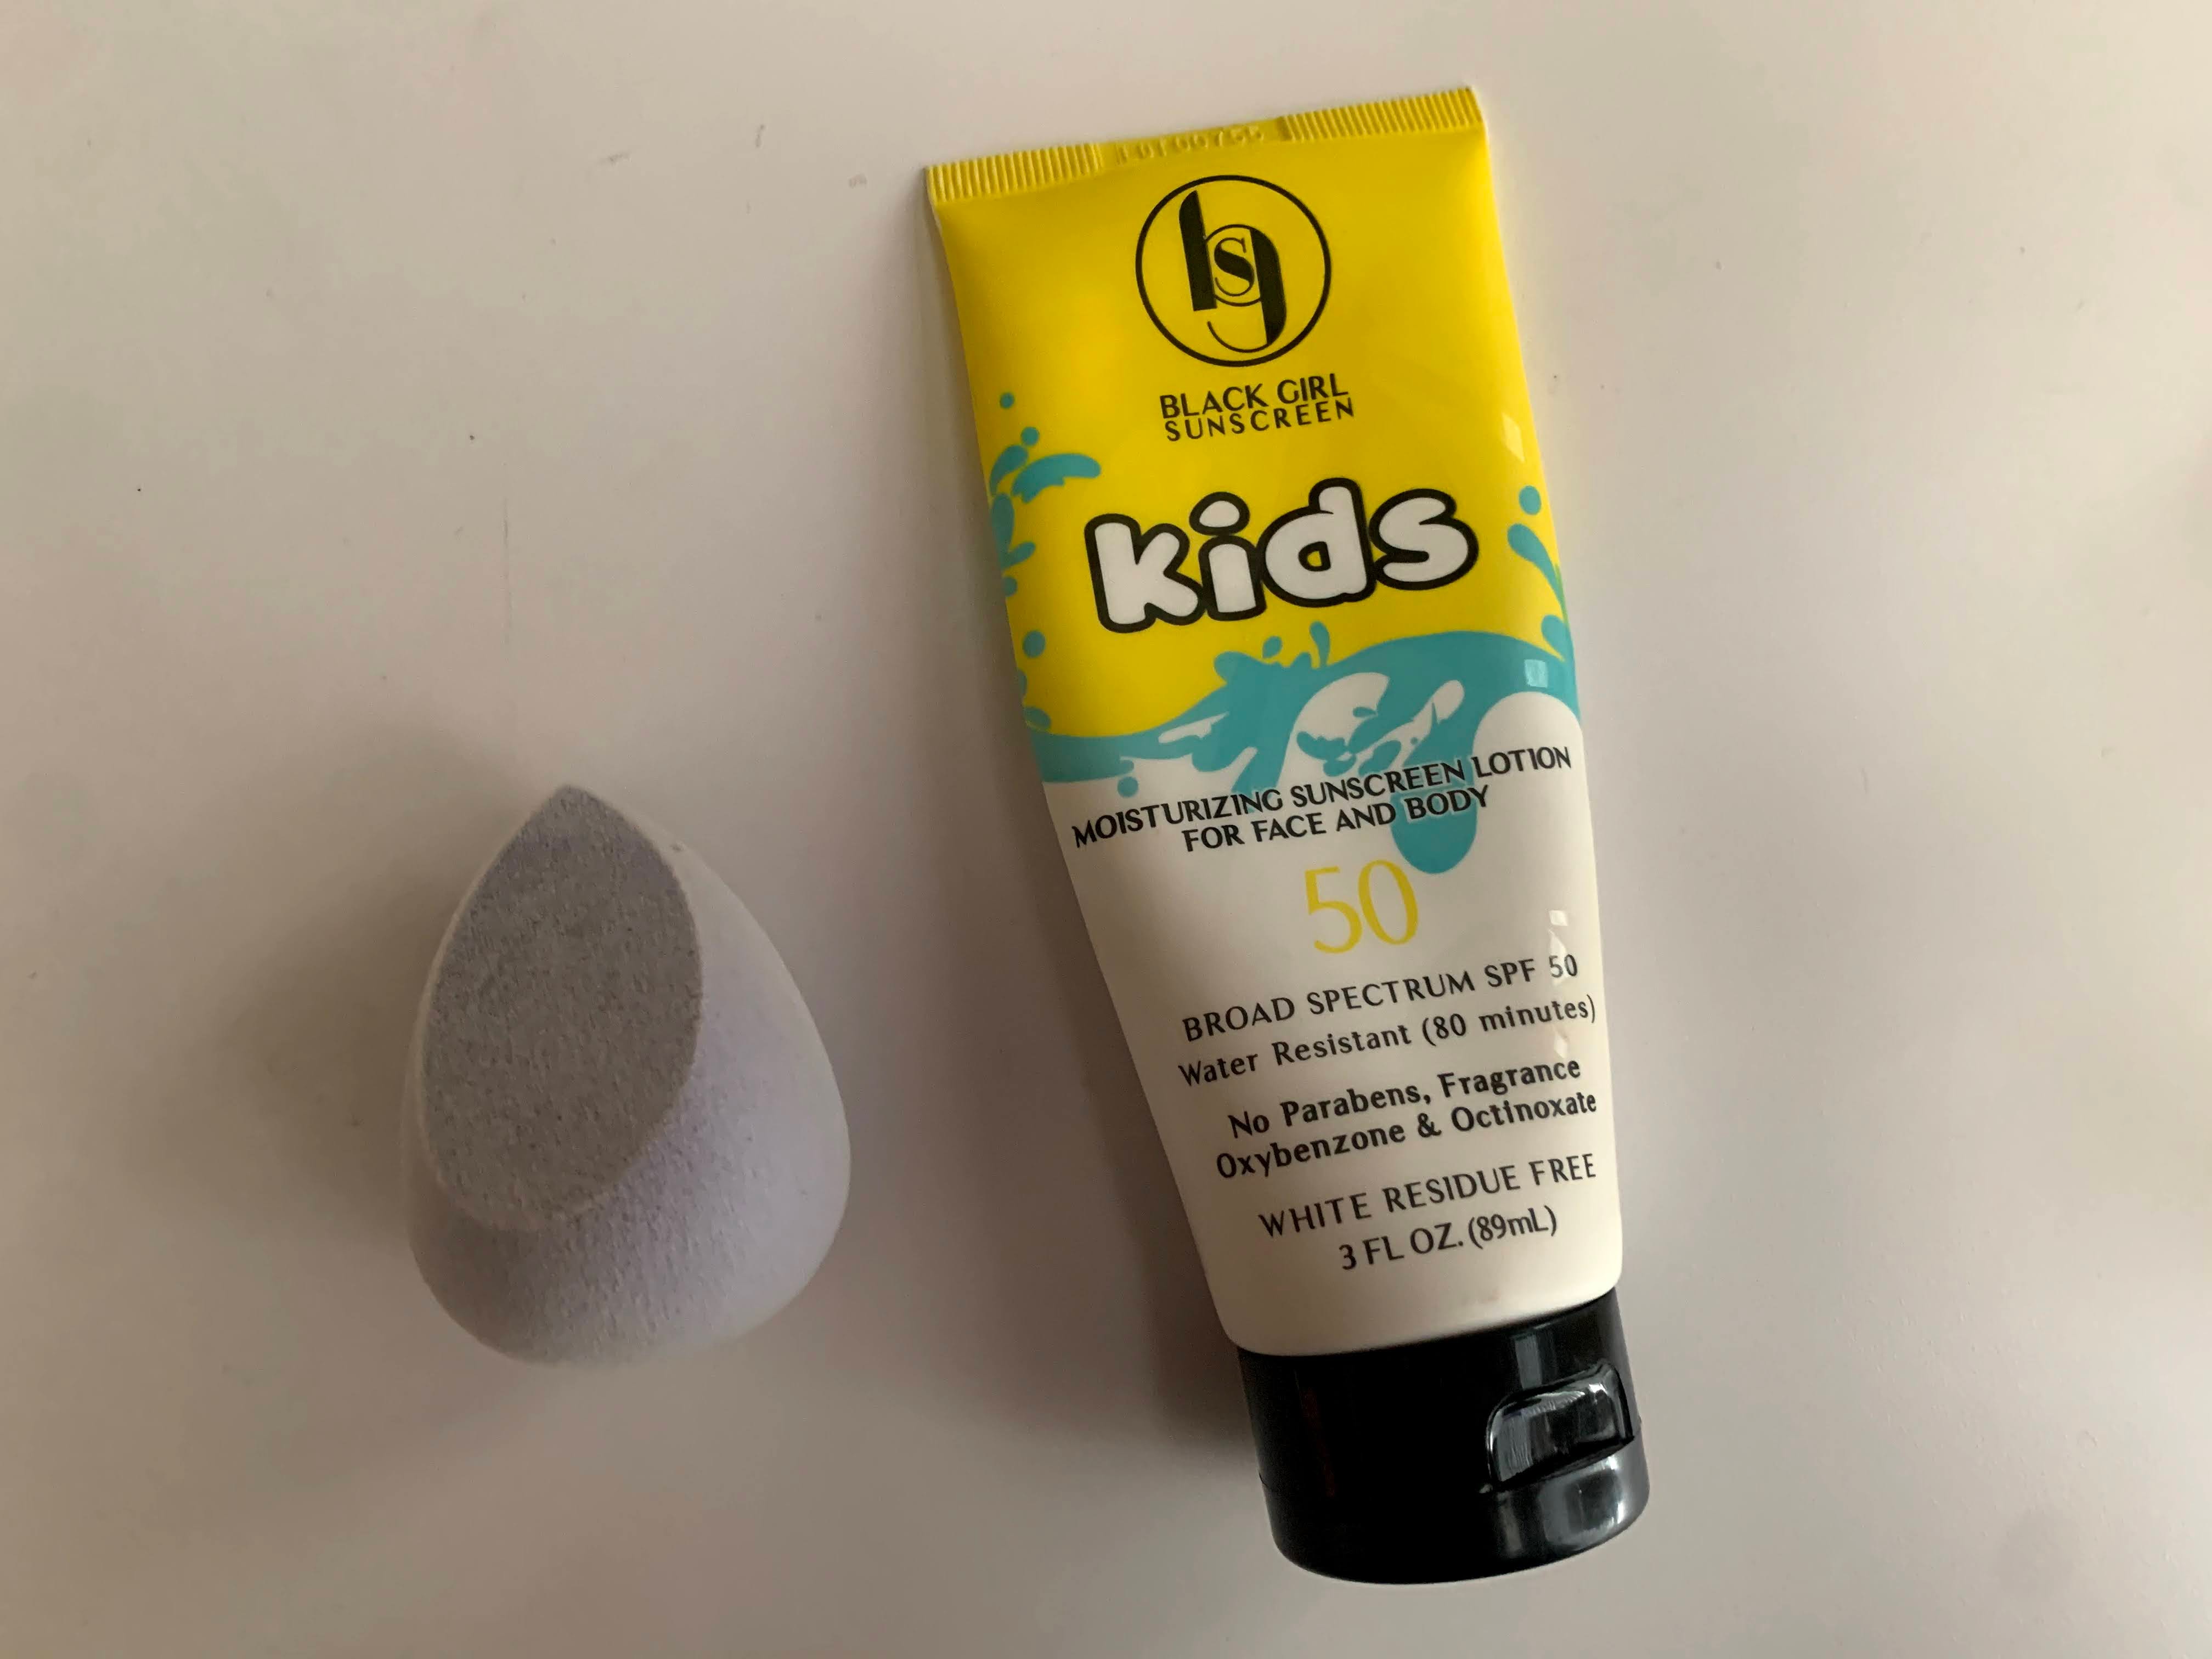 How to Reapply Sunscreen with a Microfiber Sponge + Black Girl Sunscreen Kids SPF 50